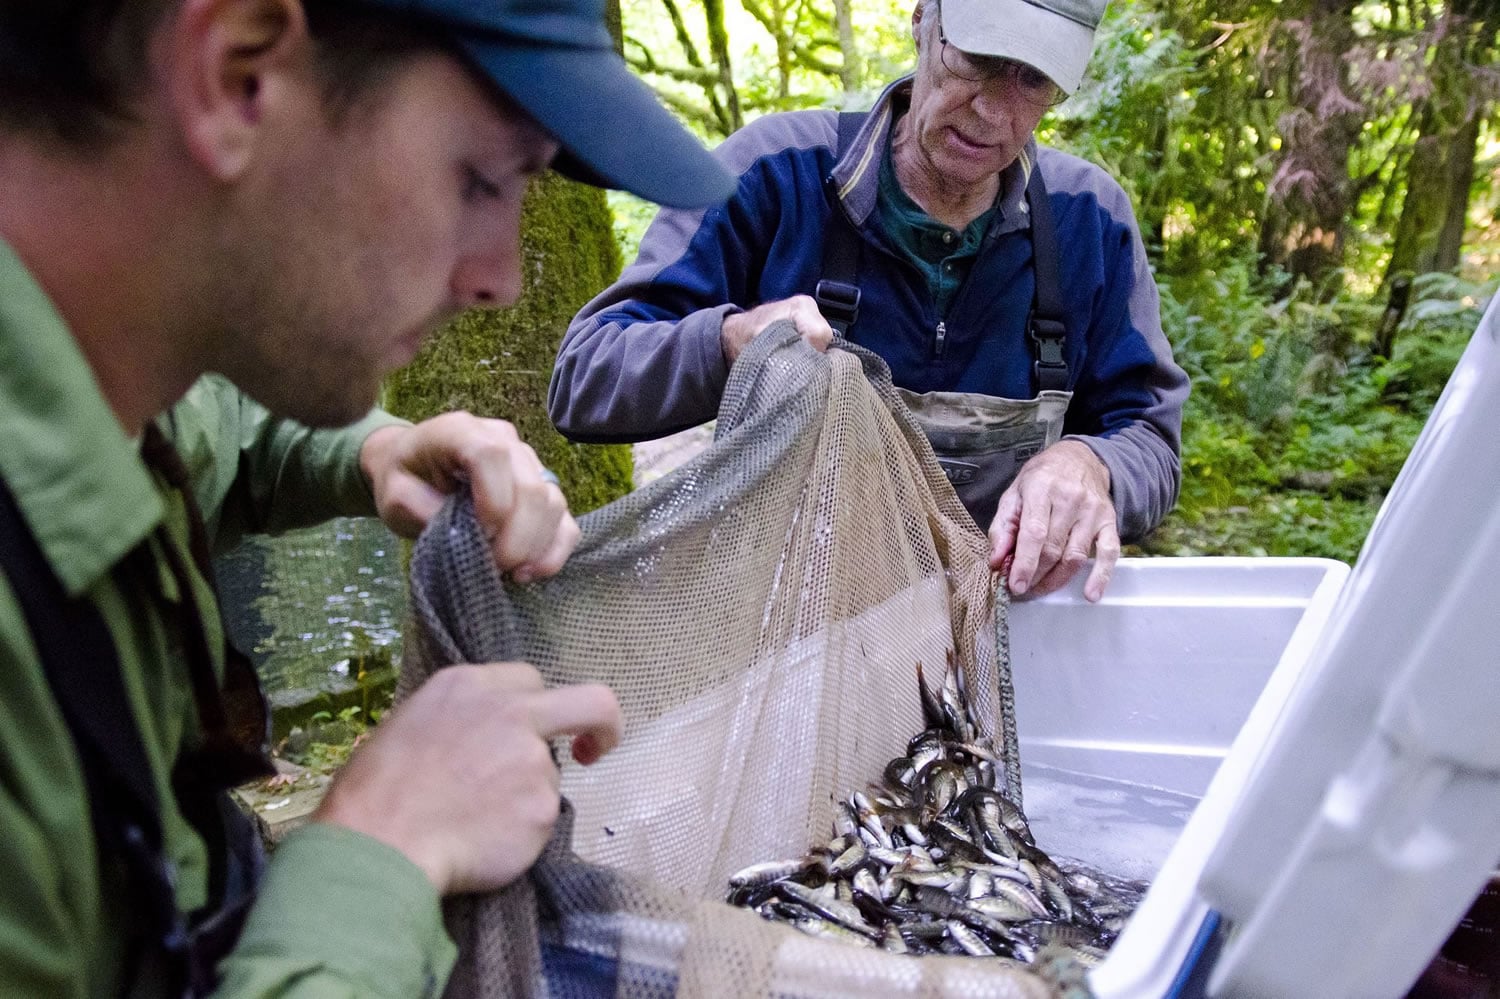 Brice Crayne, a field technician at Clark Public Utilities and assistant at Northwest Wild Fish Rescue, left, helps Dave Brown move fish from a man-made fish habitat outside Battle Ground this week.